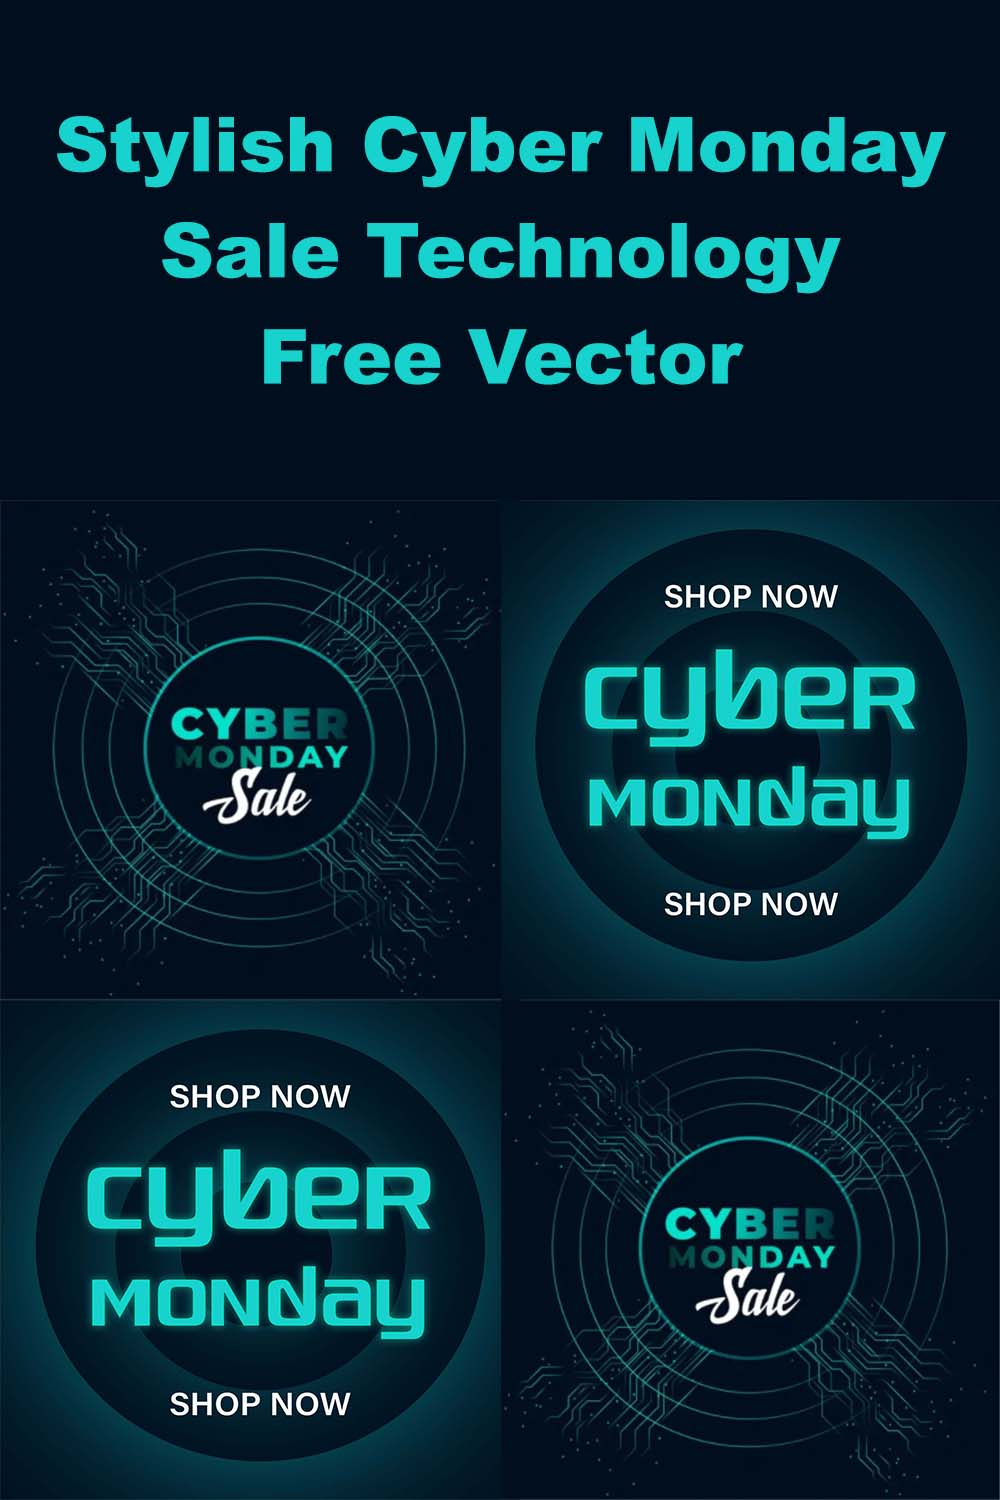 Glitch Cyber Monday Concept Free Vector pinterest image.